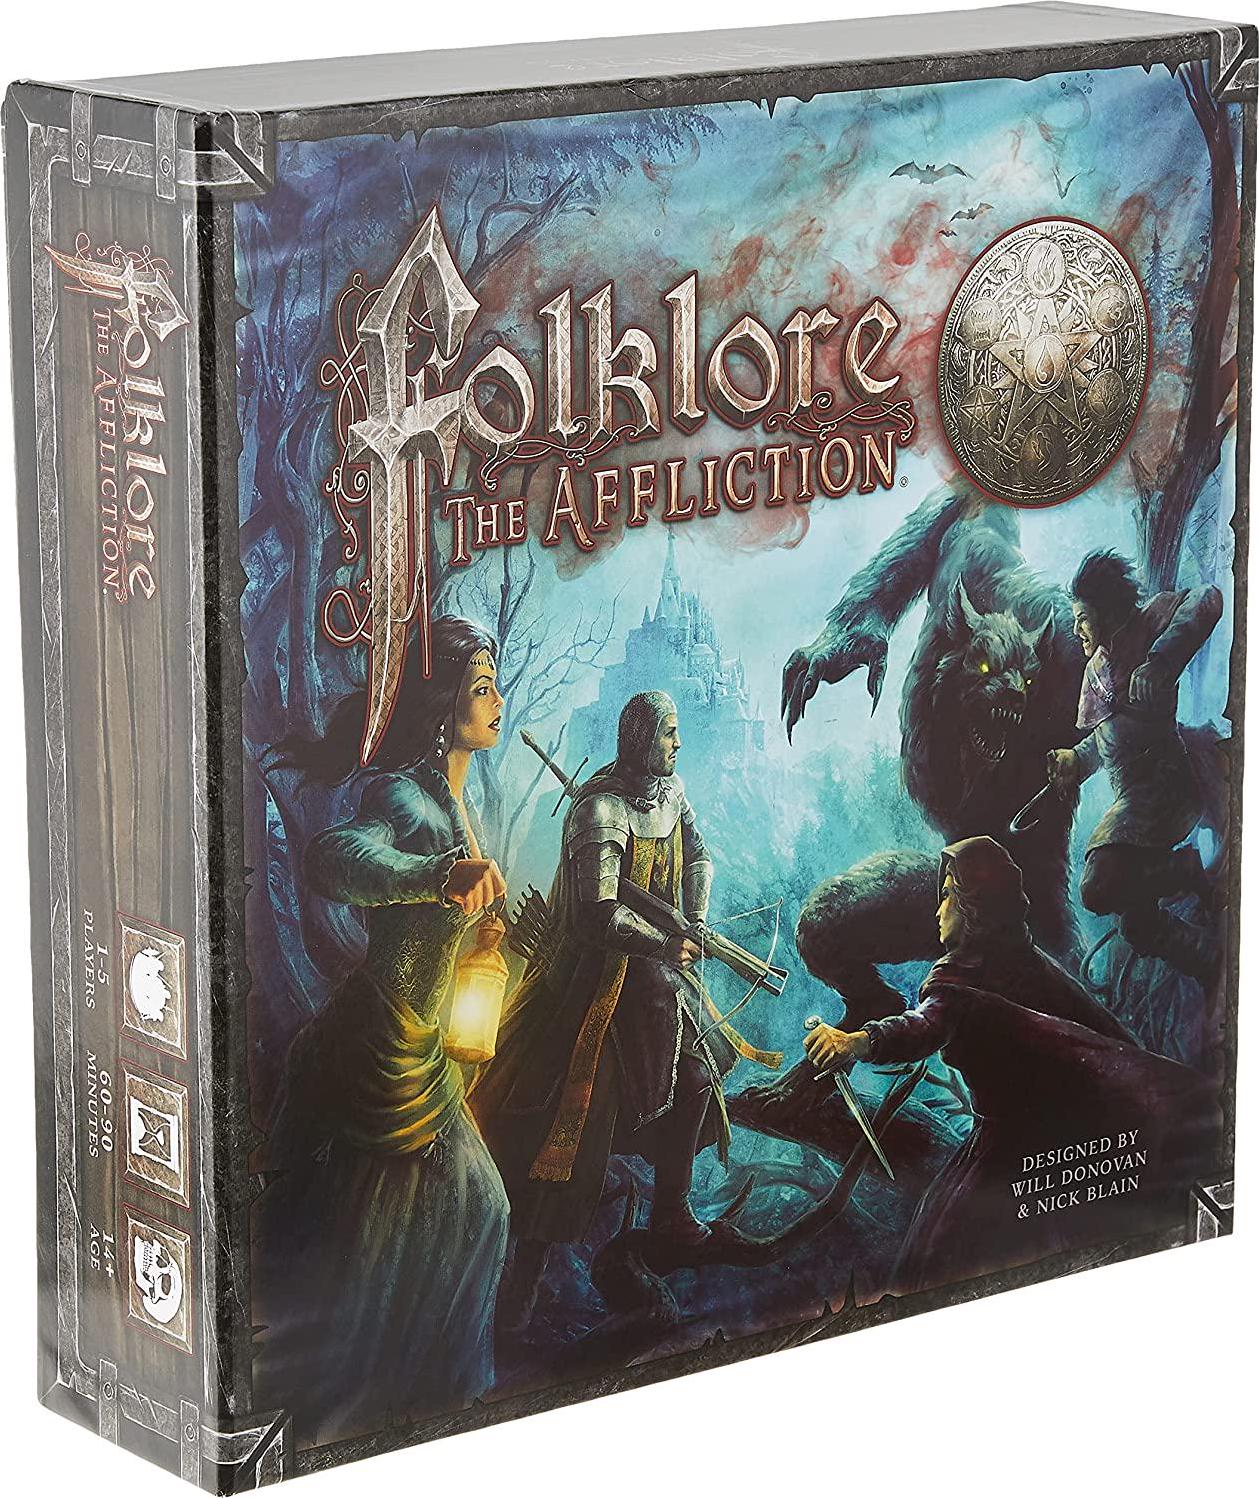 GreenBrier Games, GreenBrier Games Folklore The Affliction Board Game, Multi-Colored